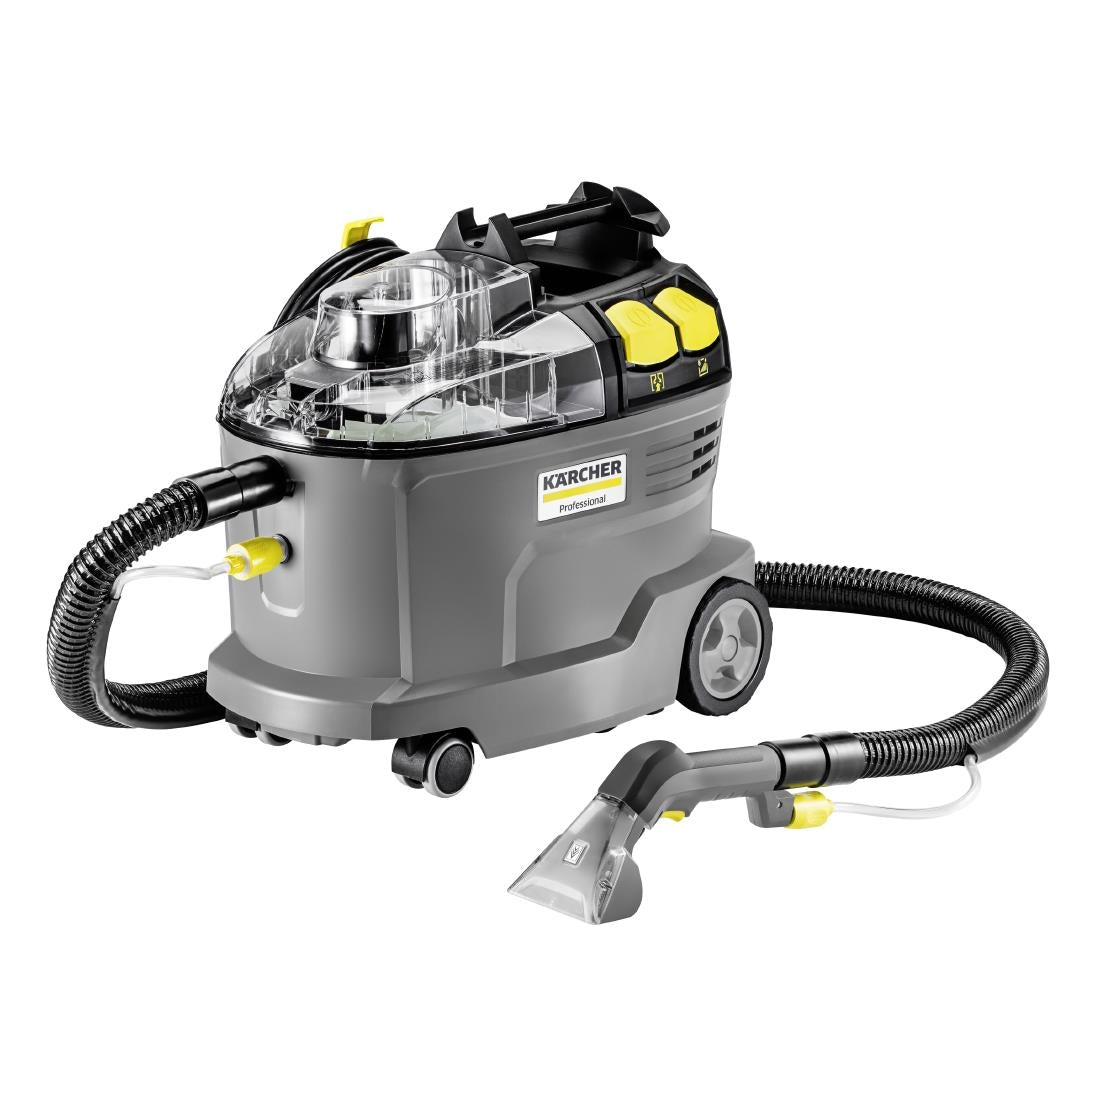 Karcher Spray Extraction Cleaner Puzzi 8/1 C